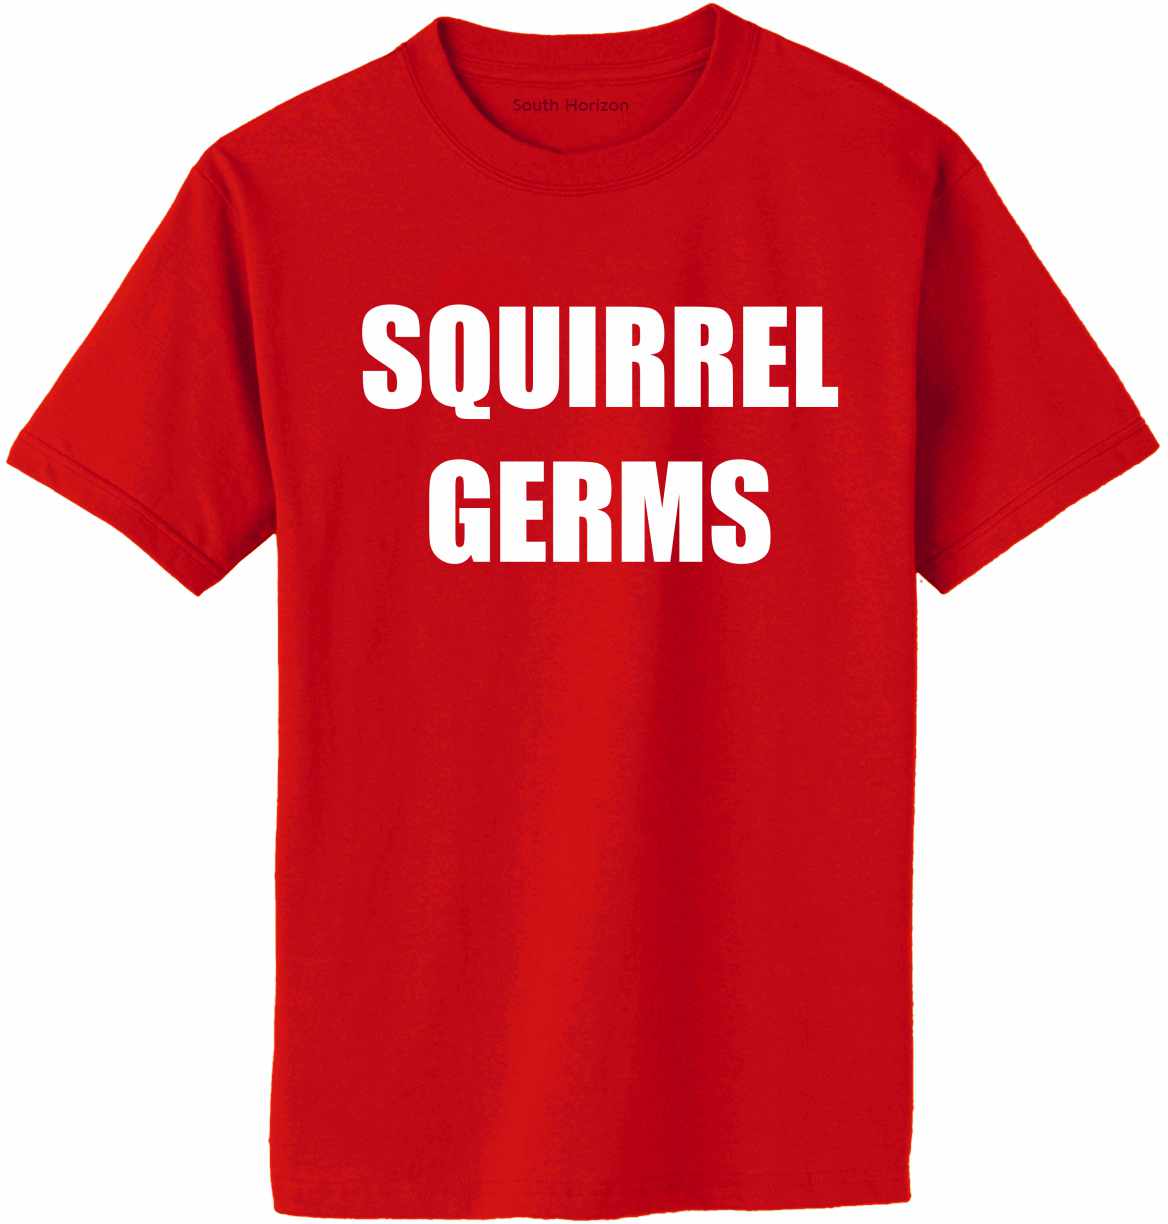 SQUIRREL GERMS Adult T-Shirt (#692-1)